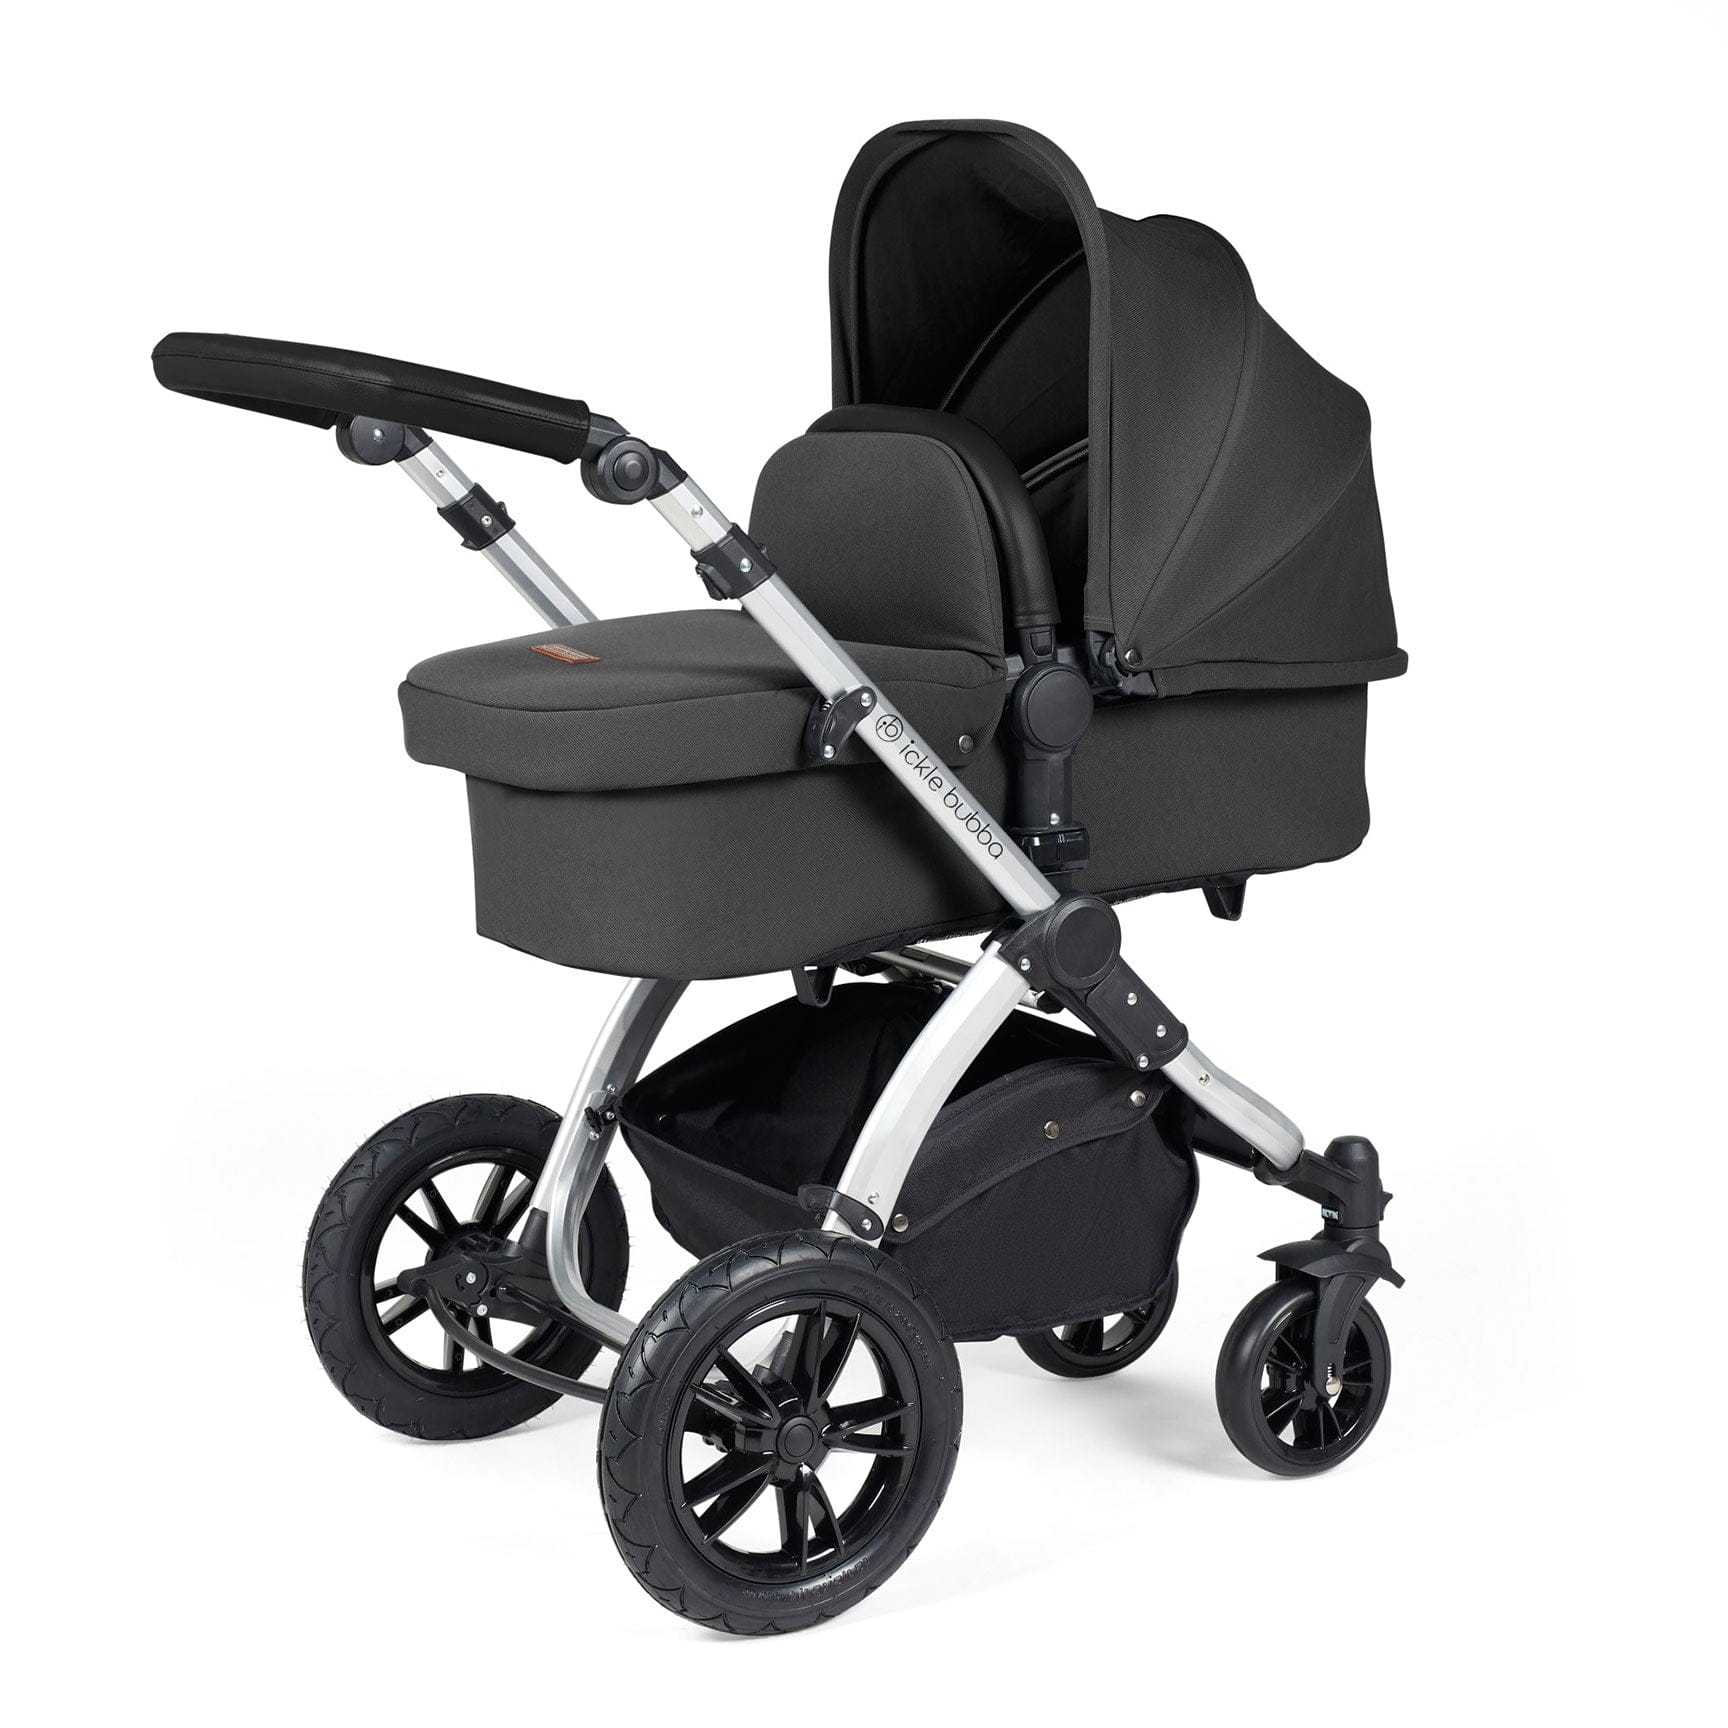 Ickle Bubba travel systems Ickle Bubba Stomp Luxe All-in-One Travel System with Isofix Base - Silver/Charcoal Grey/Black 10-011-300-254